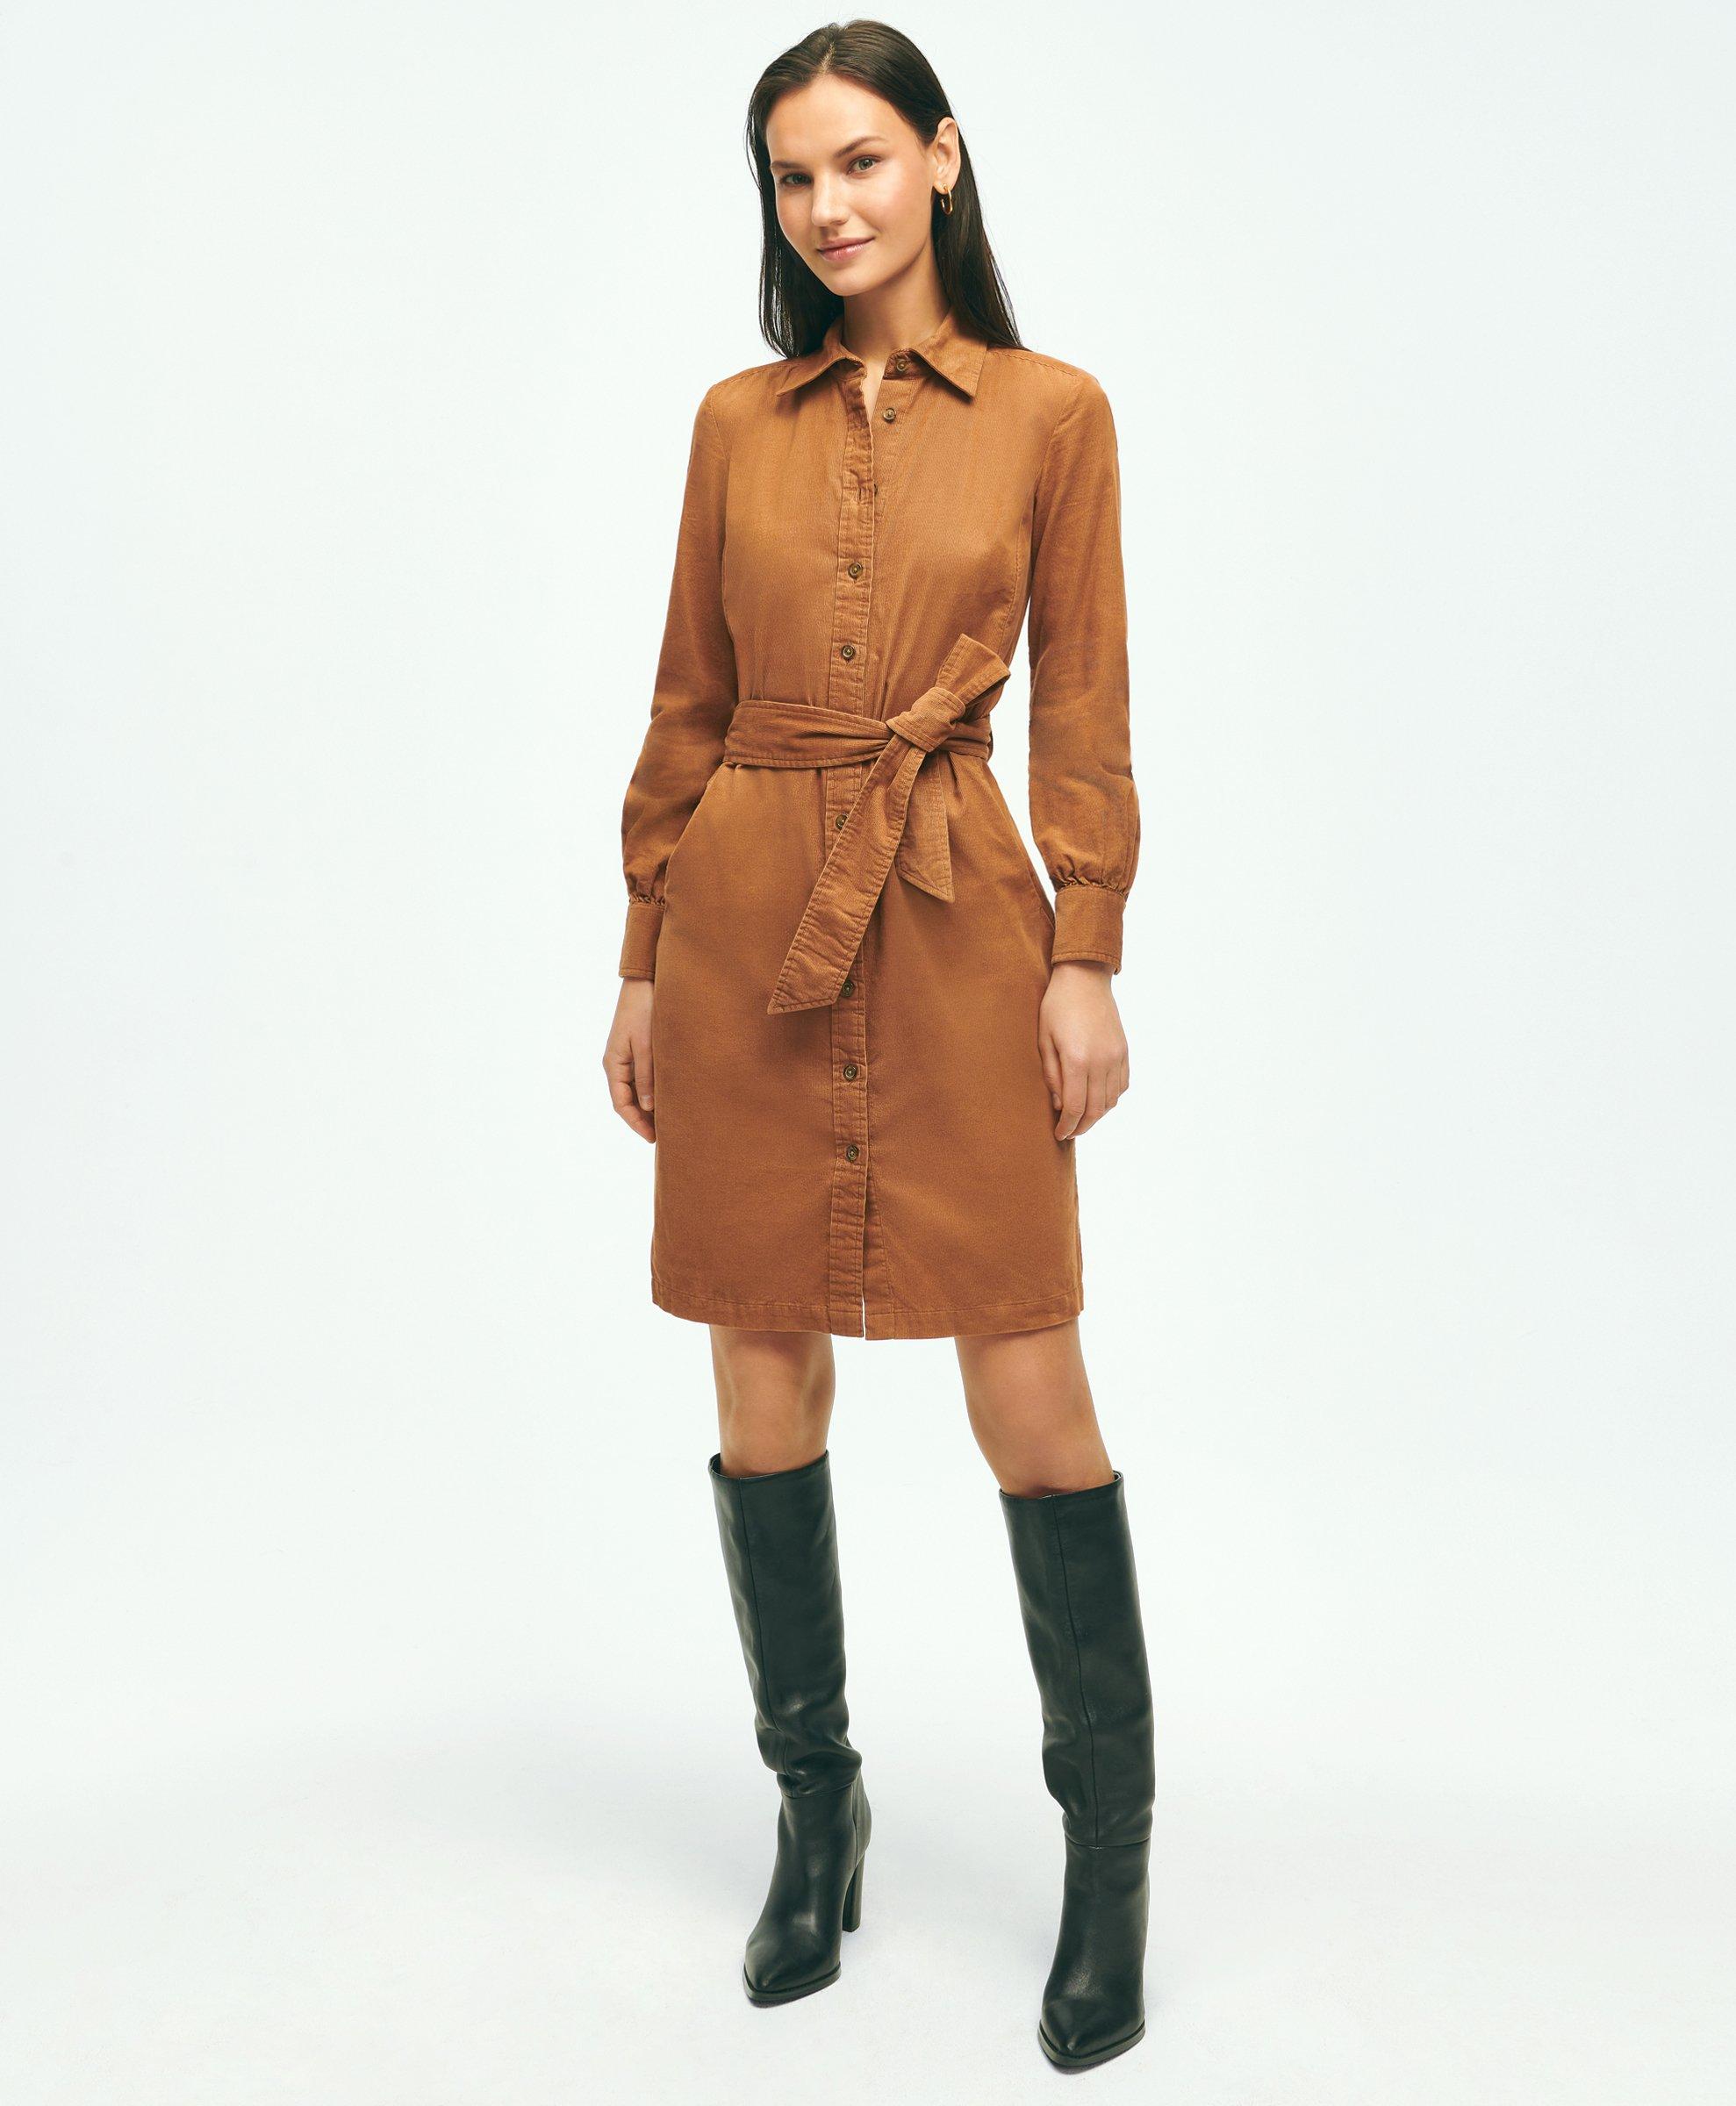 brown corduroy outfit  Brown outfit, Classy casual outfits